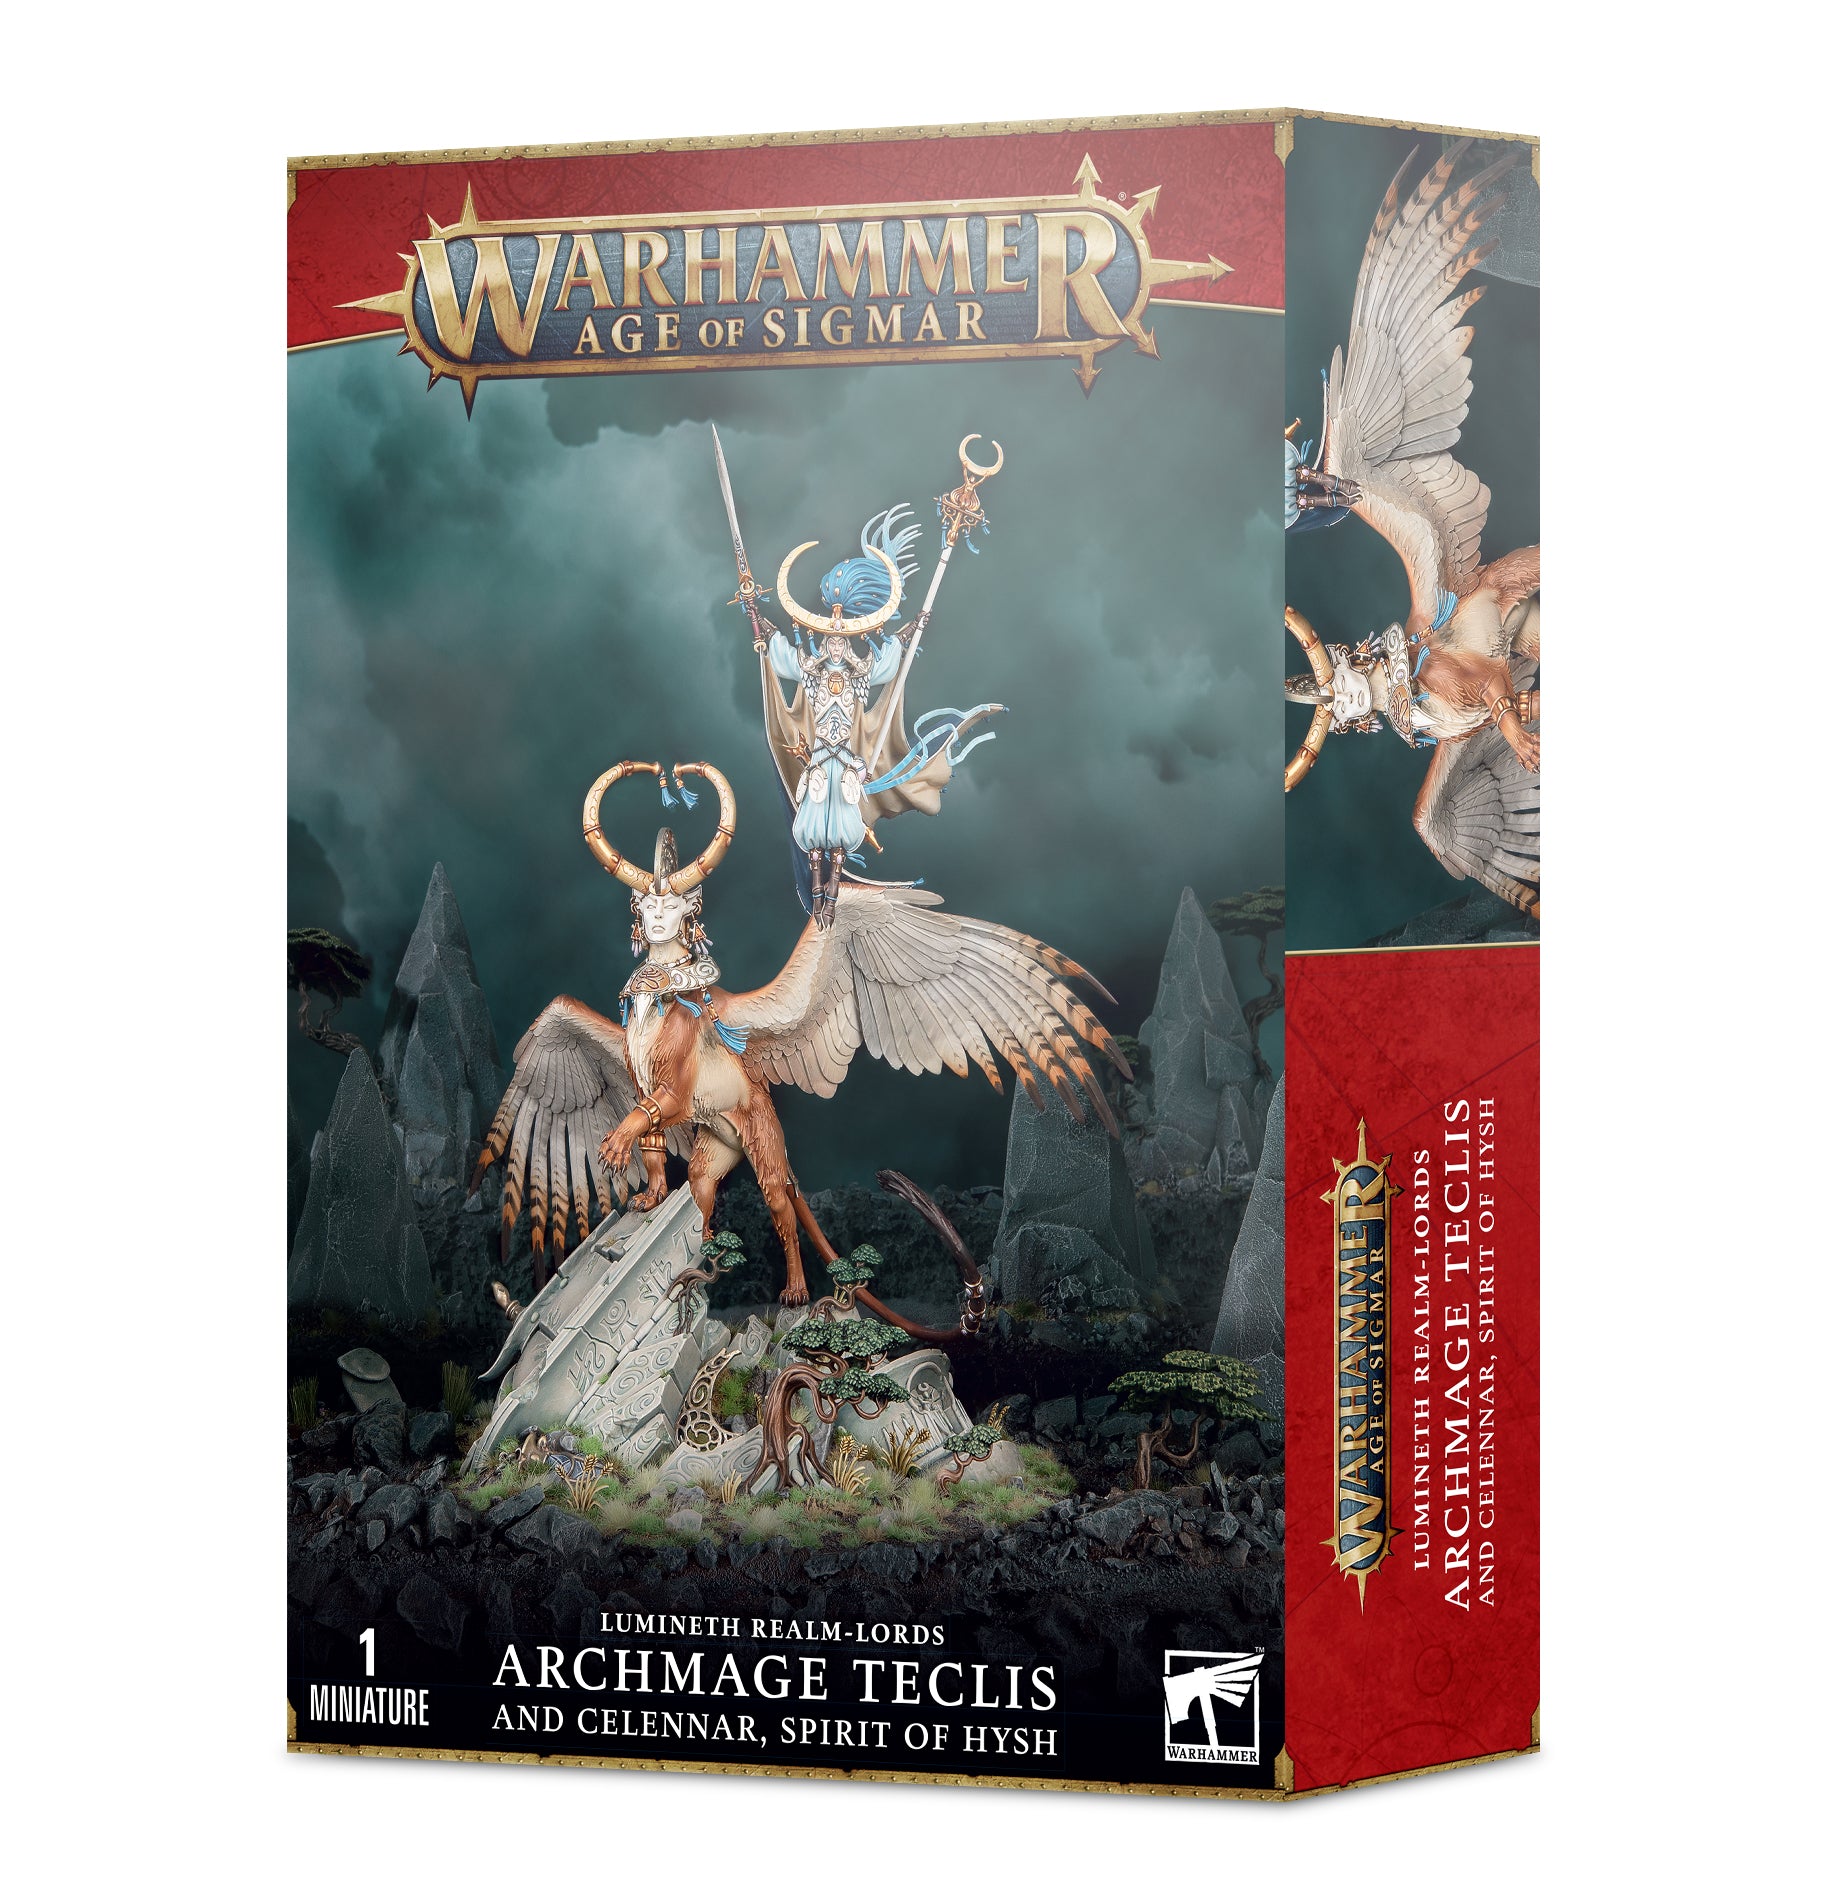 Warhammer Age of Sigmar: Lumineth Realm-lords Archmage Teclis